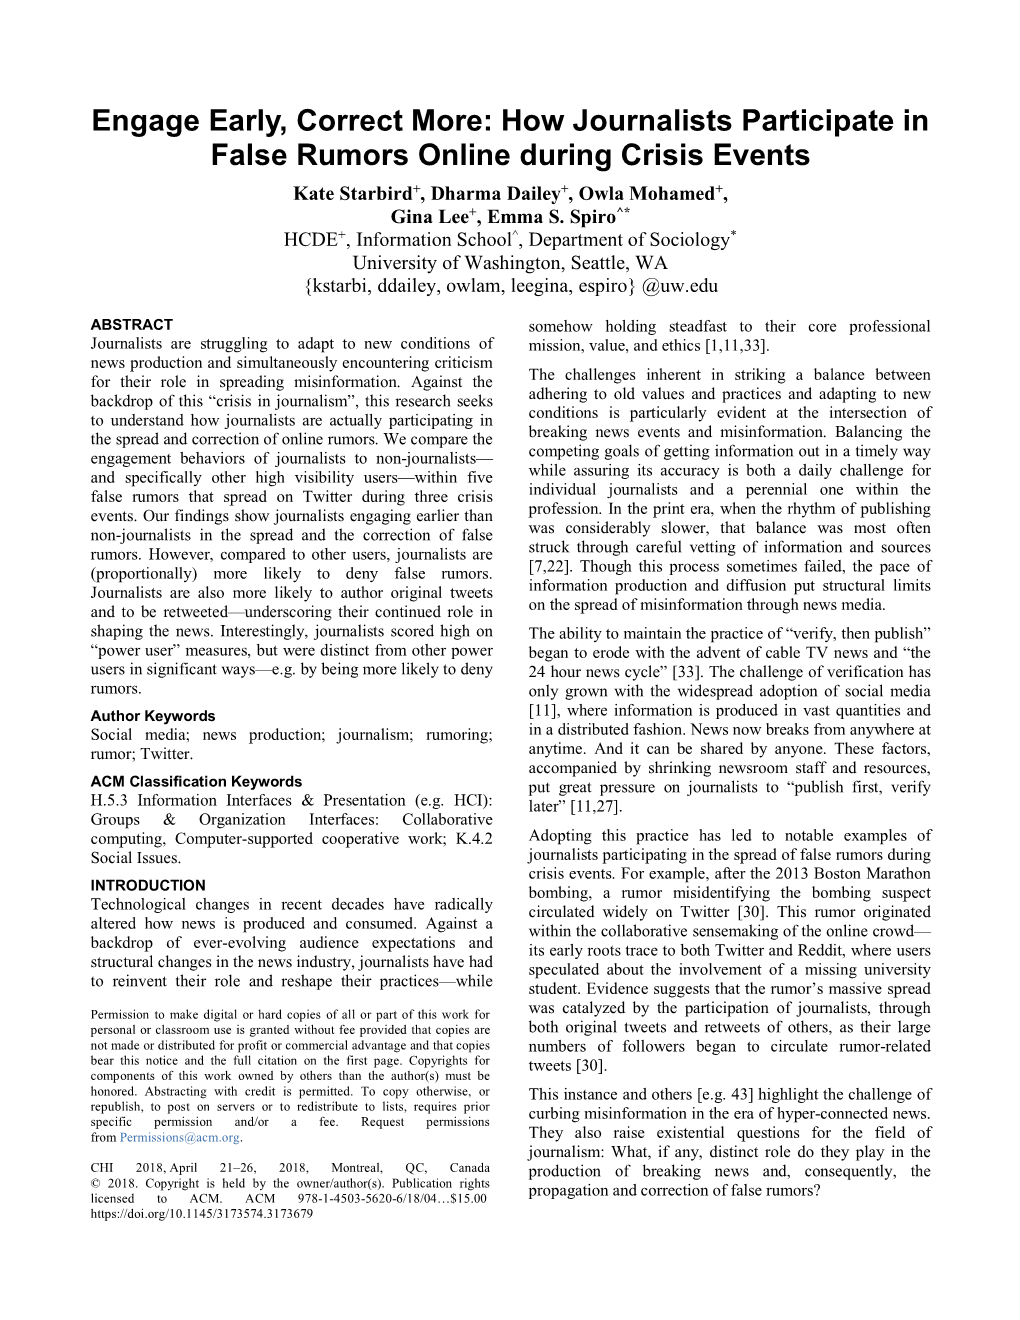 How Journalists Participate in False Rumors Online During Crisis Events Kate Starbird+, Dharma Dailey+, Owla Mohamed+, Gina Lee+, Emma S